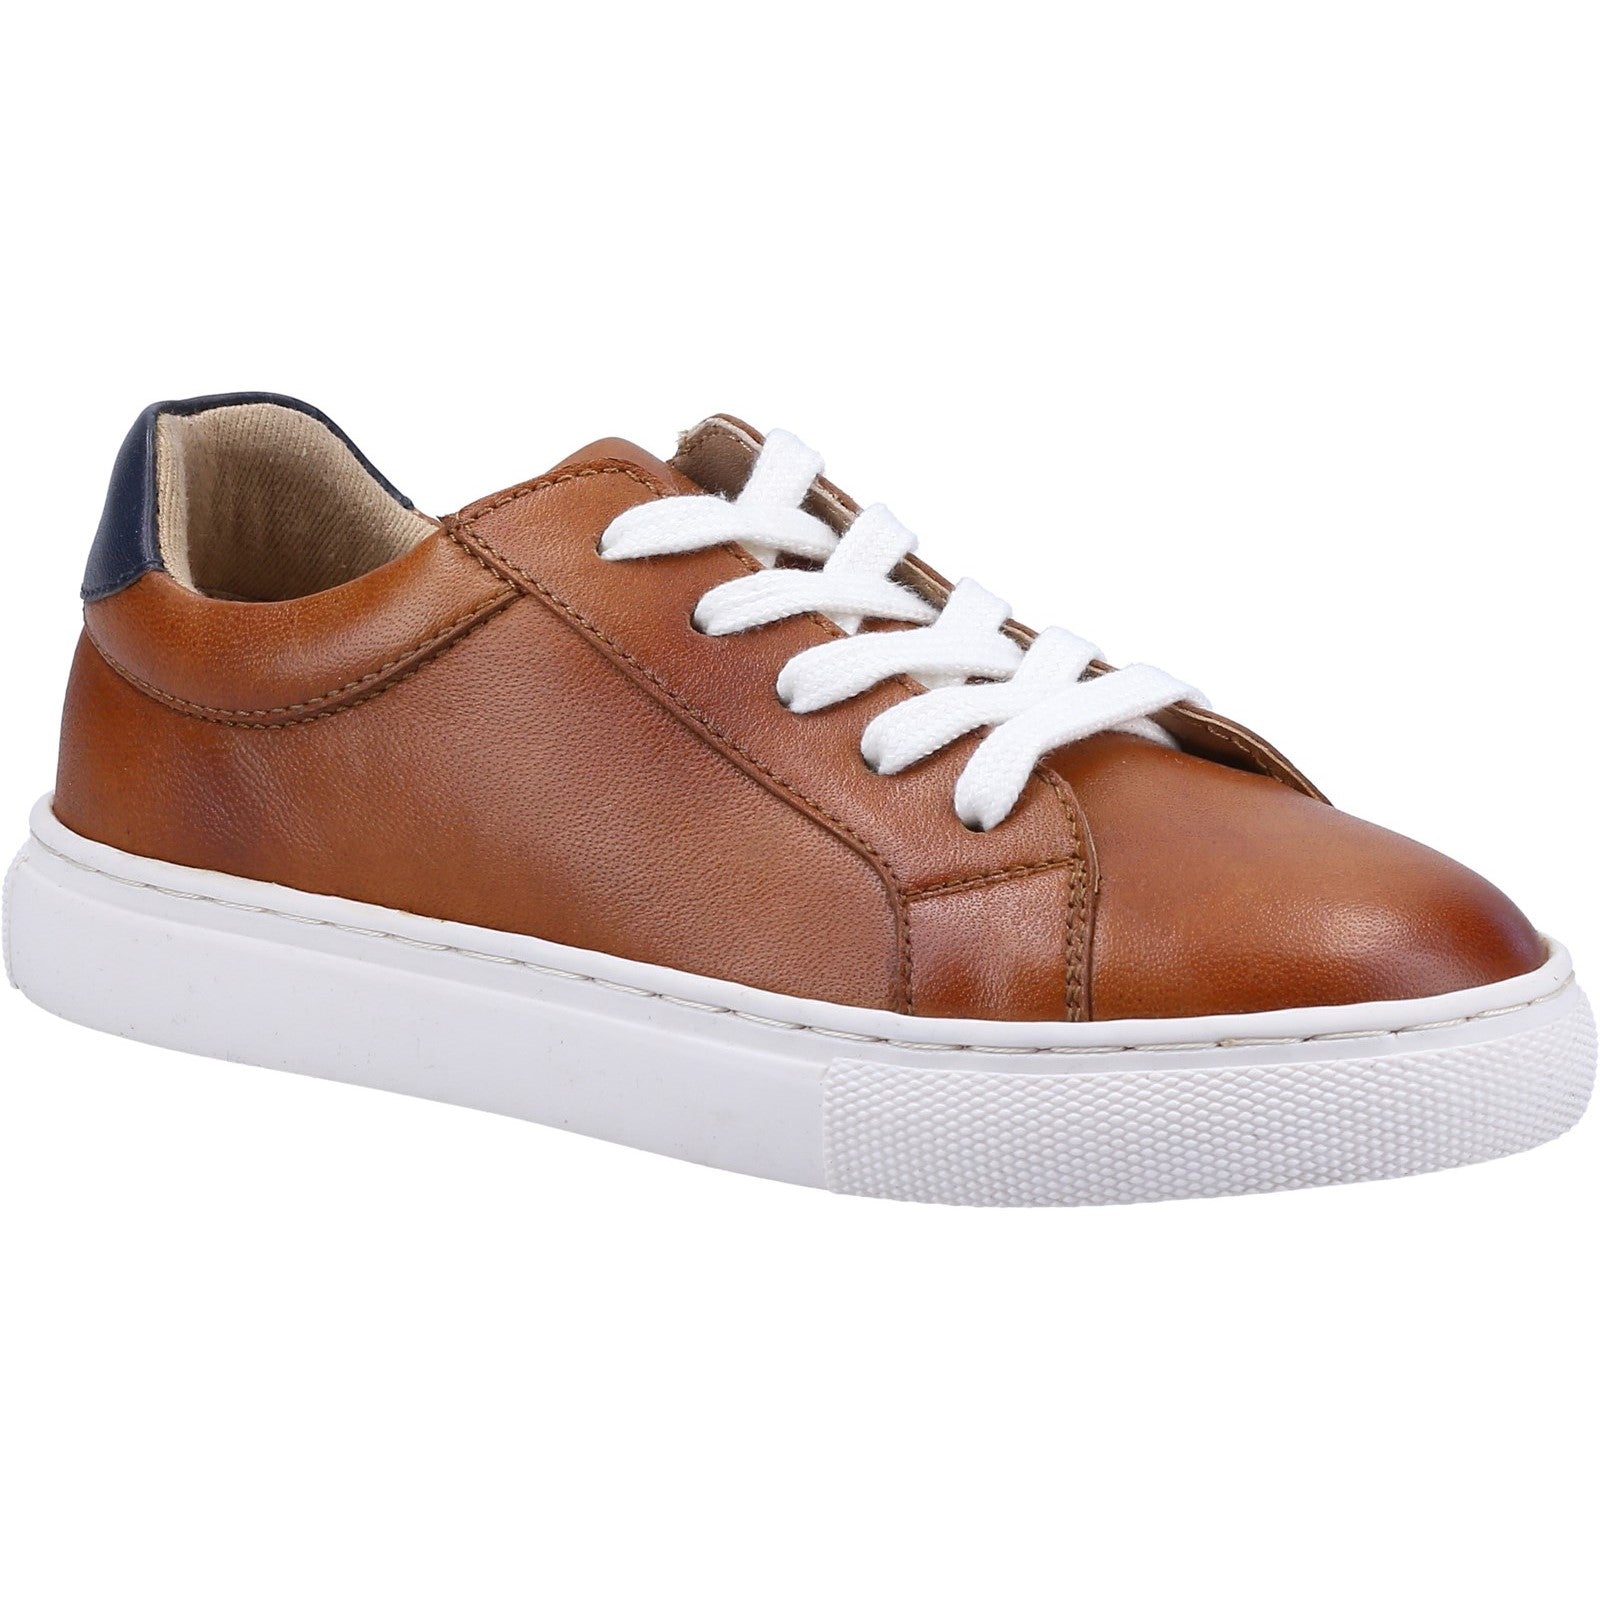 Hush Puppies Boys Colton Leather Trainers - Tan